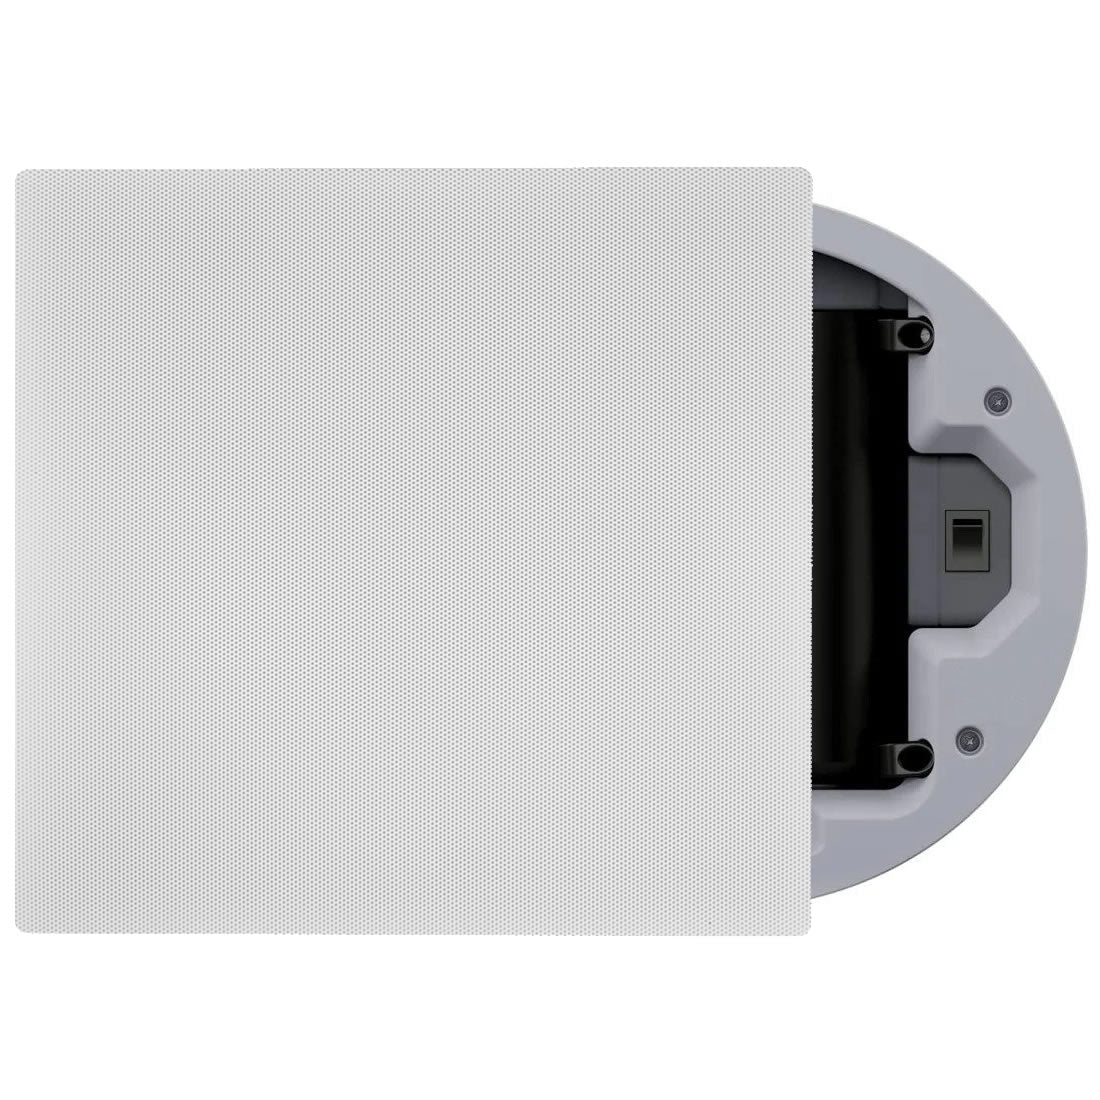 SpkrShell Architectural SL1-S In-Ceiling Wireless Speaker Enclosure